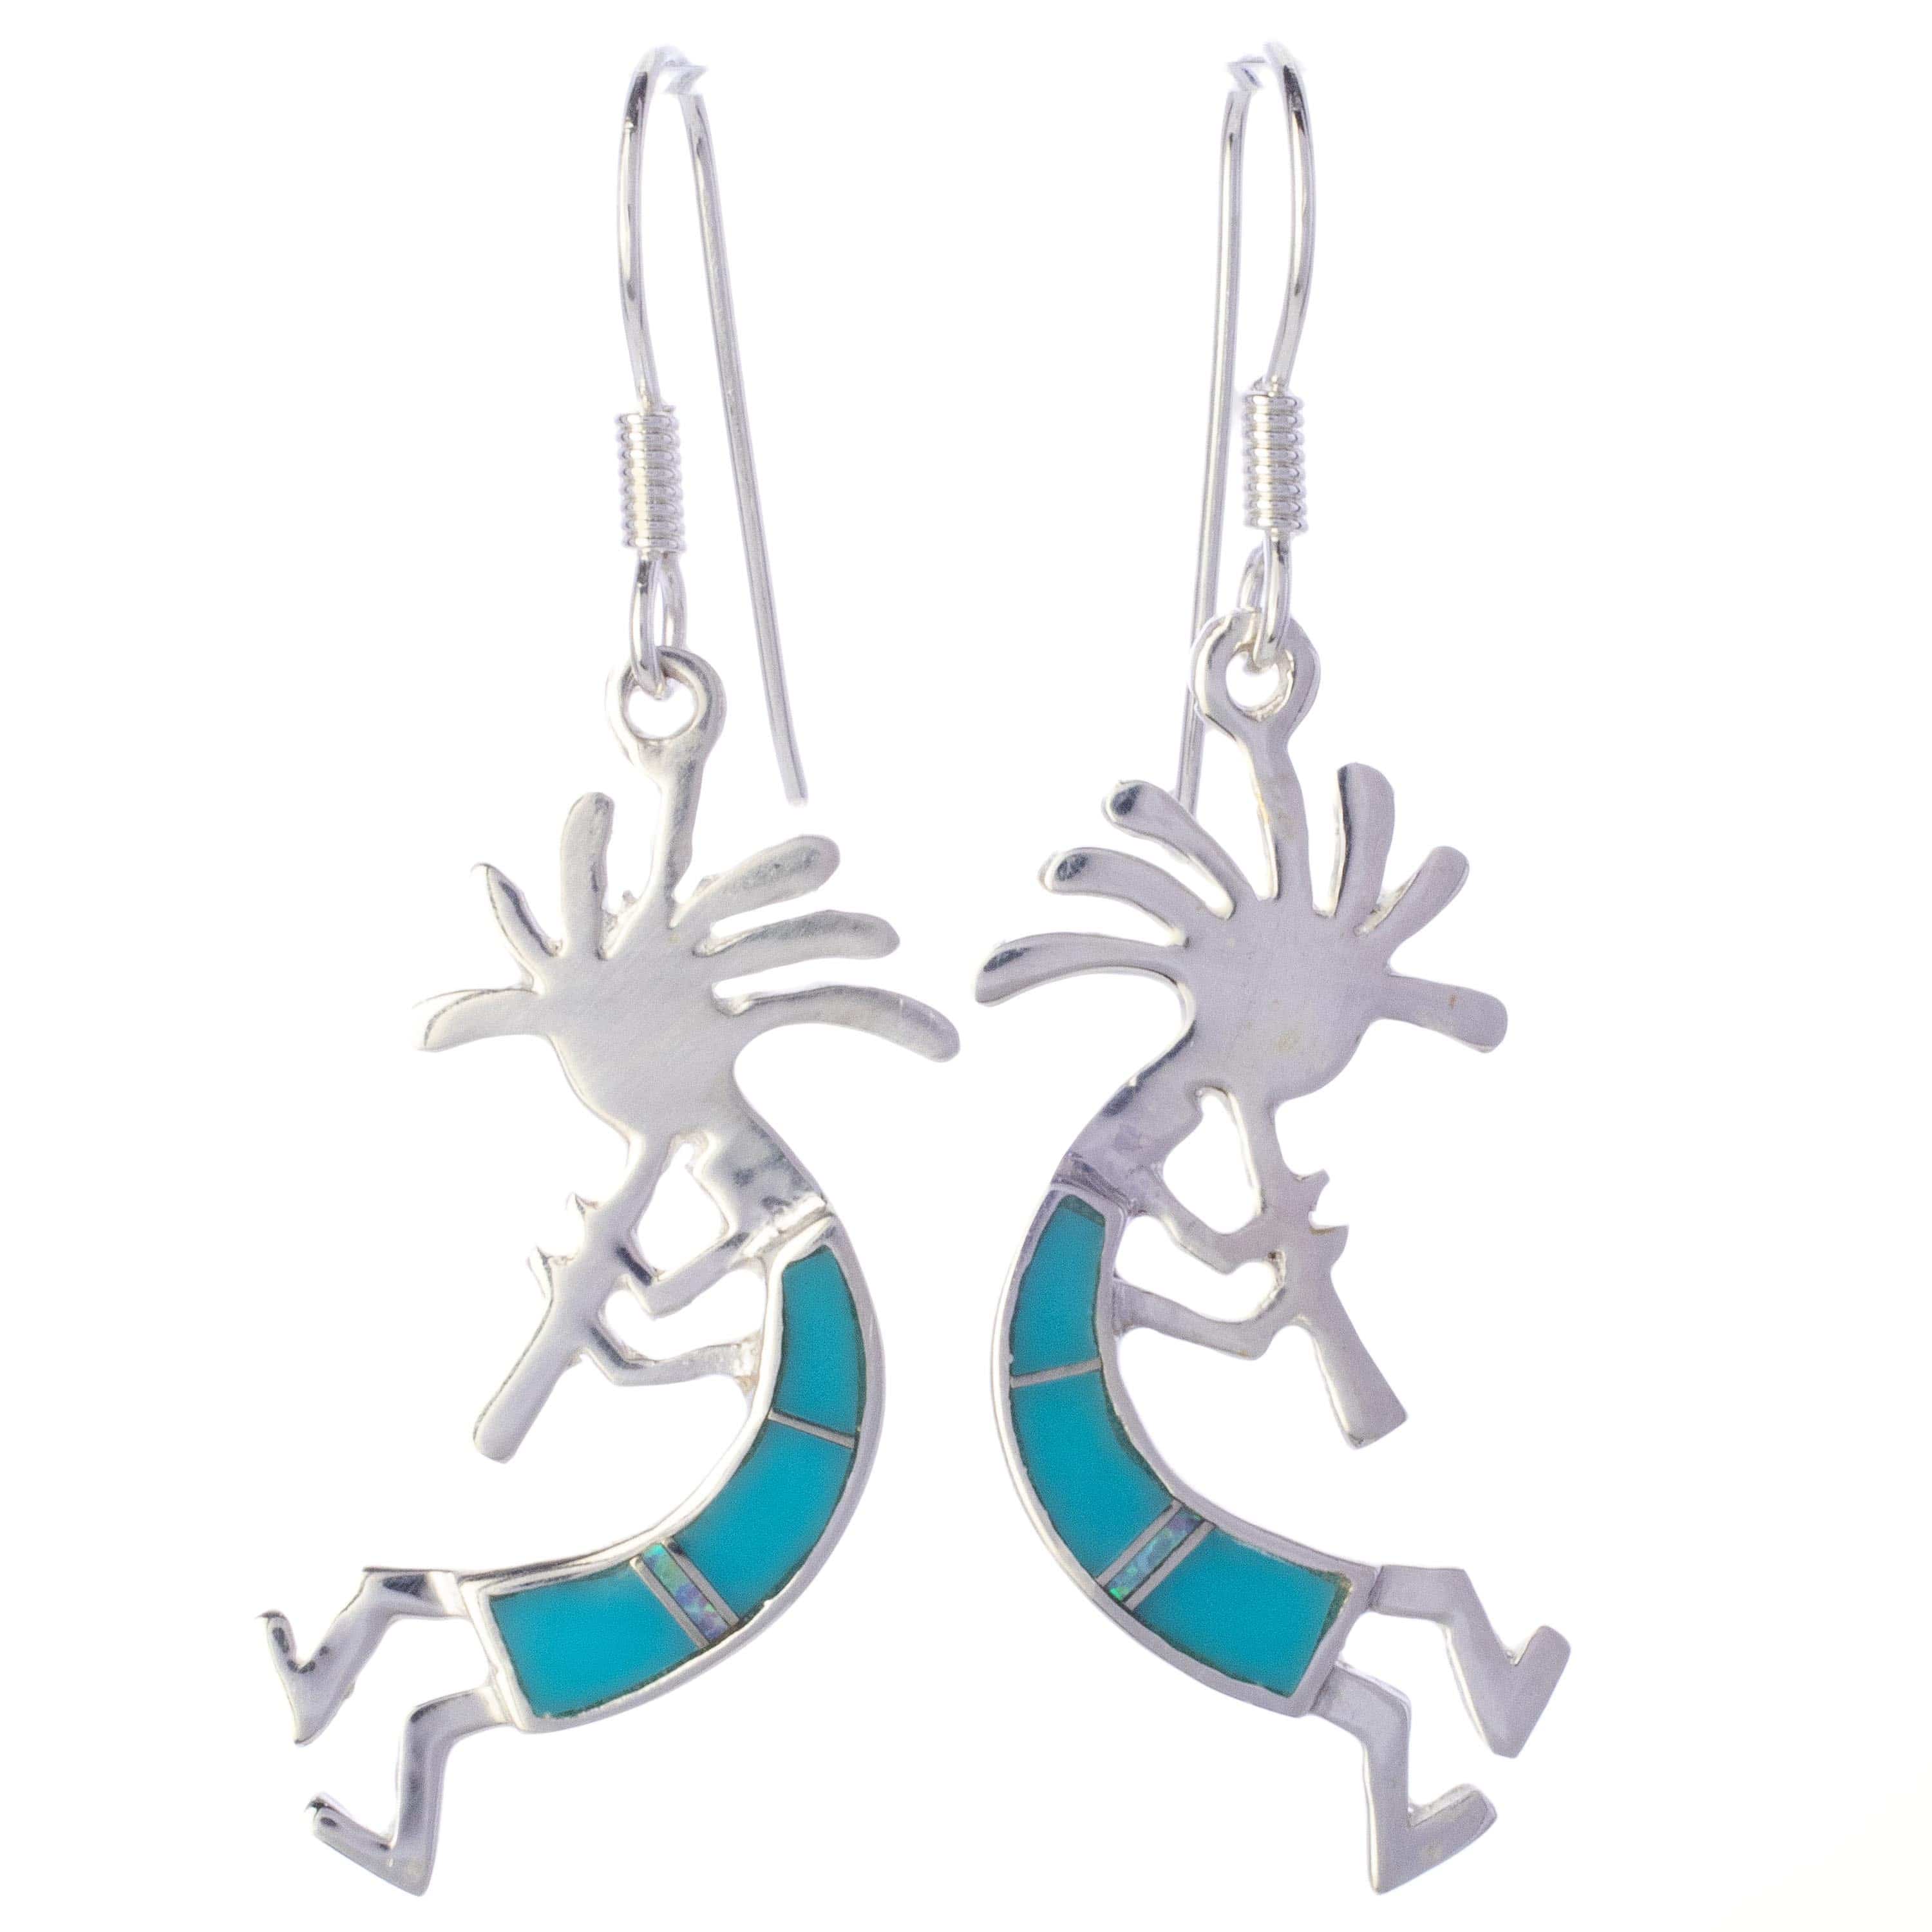 KALIFANO Southwest Silver Jewelry Turquoise Kokopelli Sterling Silver Earrings with French Hook USA Handmade with Opal Accent NME.2150.TQ